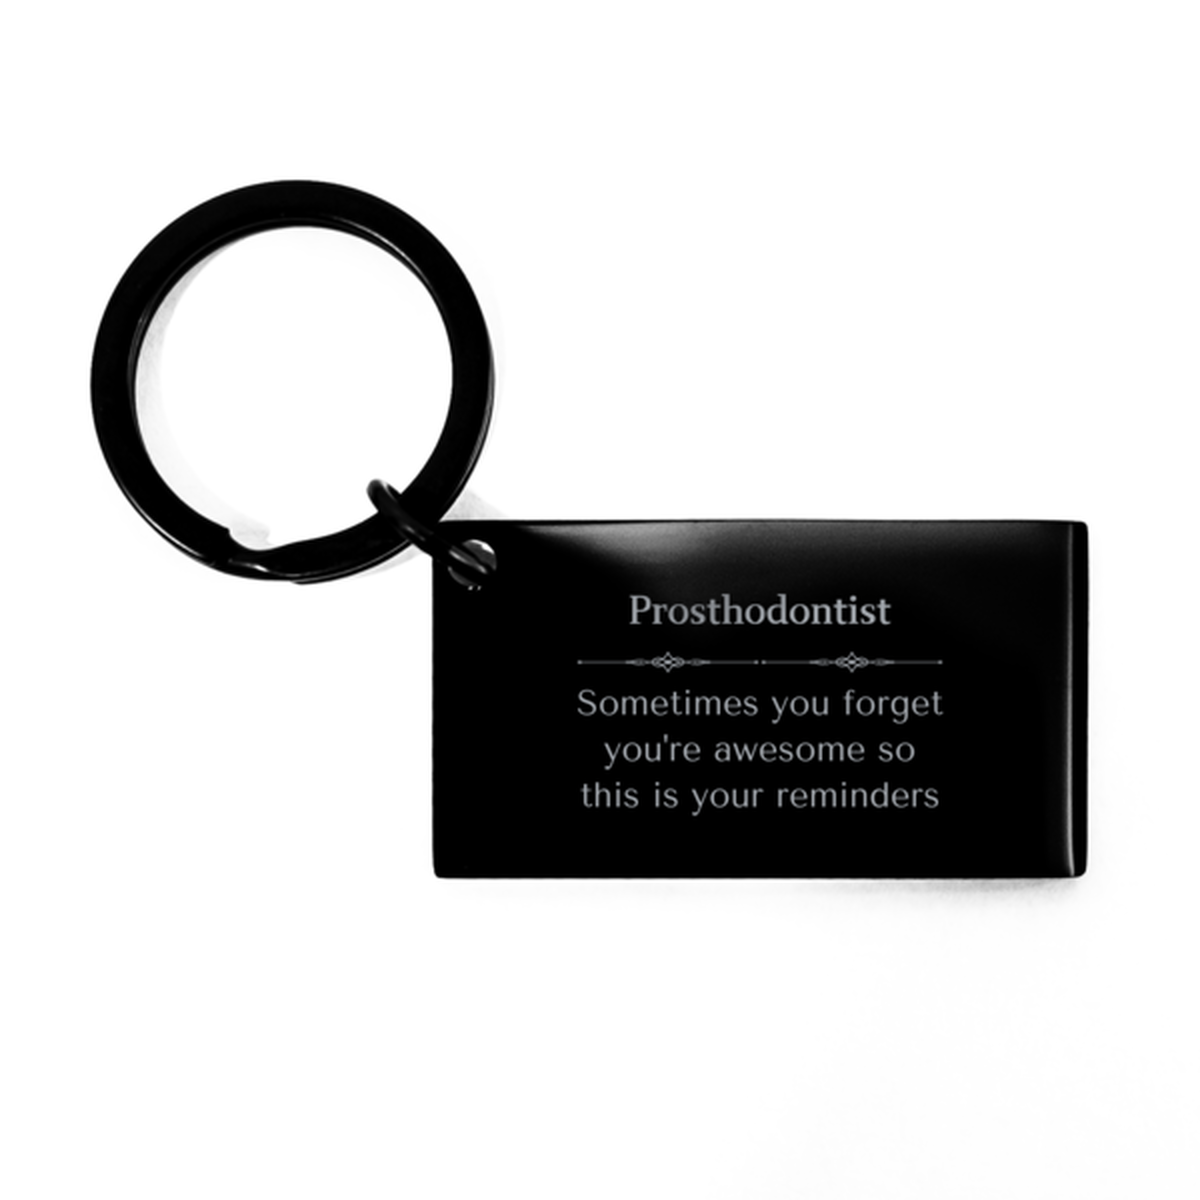 Sentimental Prosthodontist Keychain, Social Worker Sometimes you forget you're awesome so this is your reminders, Graduation Christmas Birthday Gifts for Prosthodontist, Men, Women, Coworkers